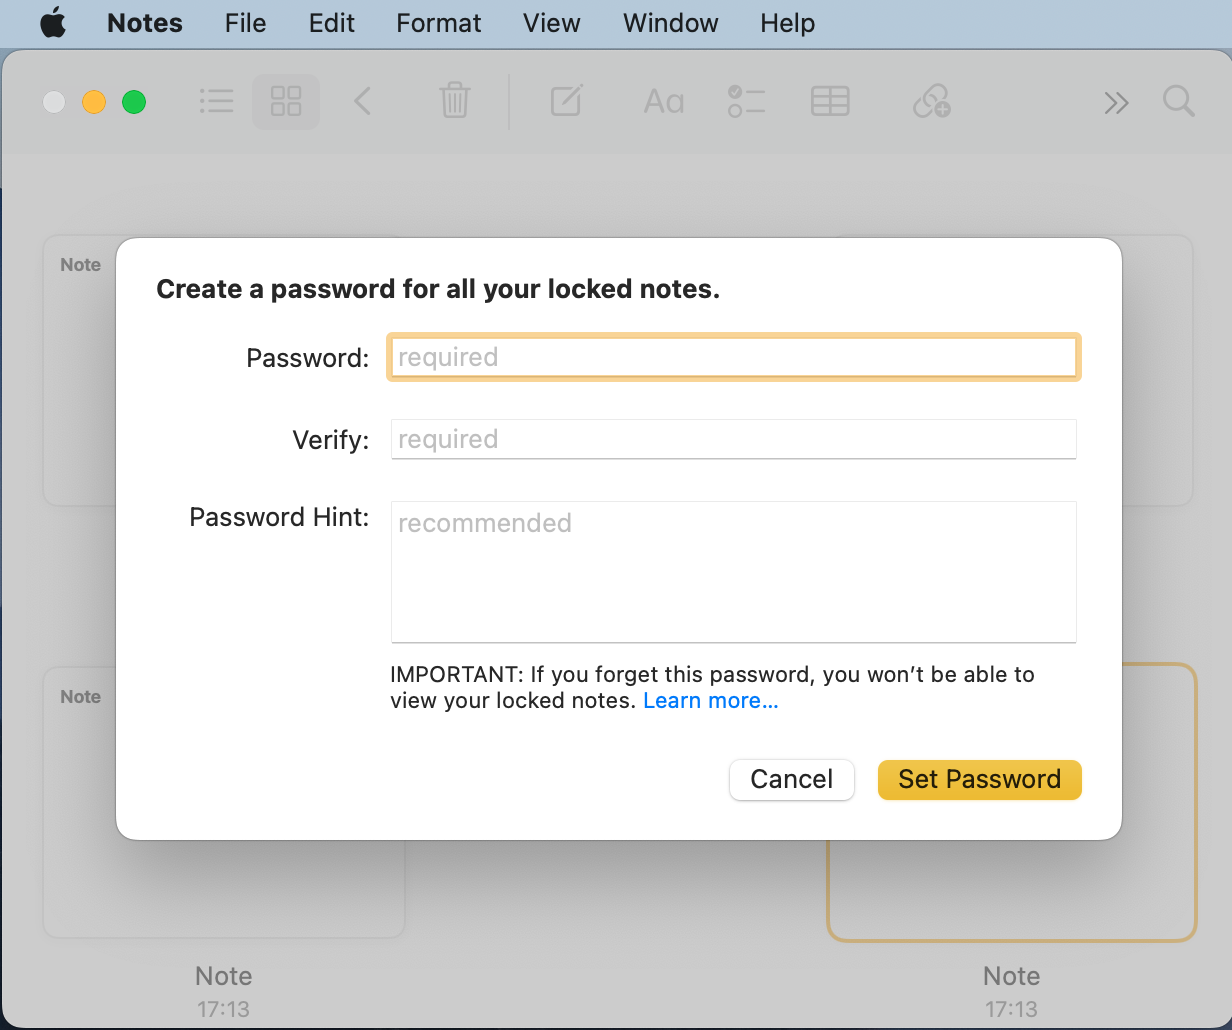 Step 2. If you opted to create your own password, enter it then click Set Password.